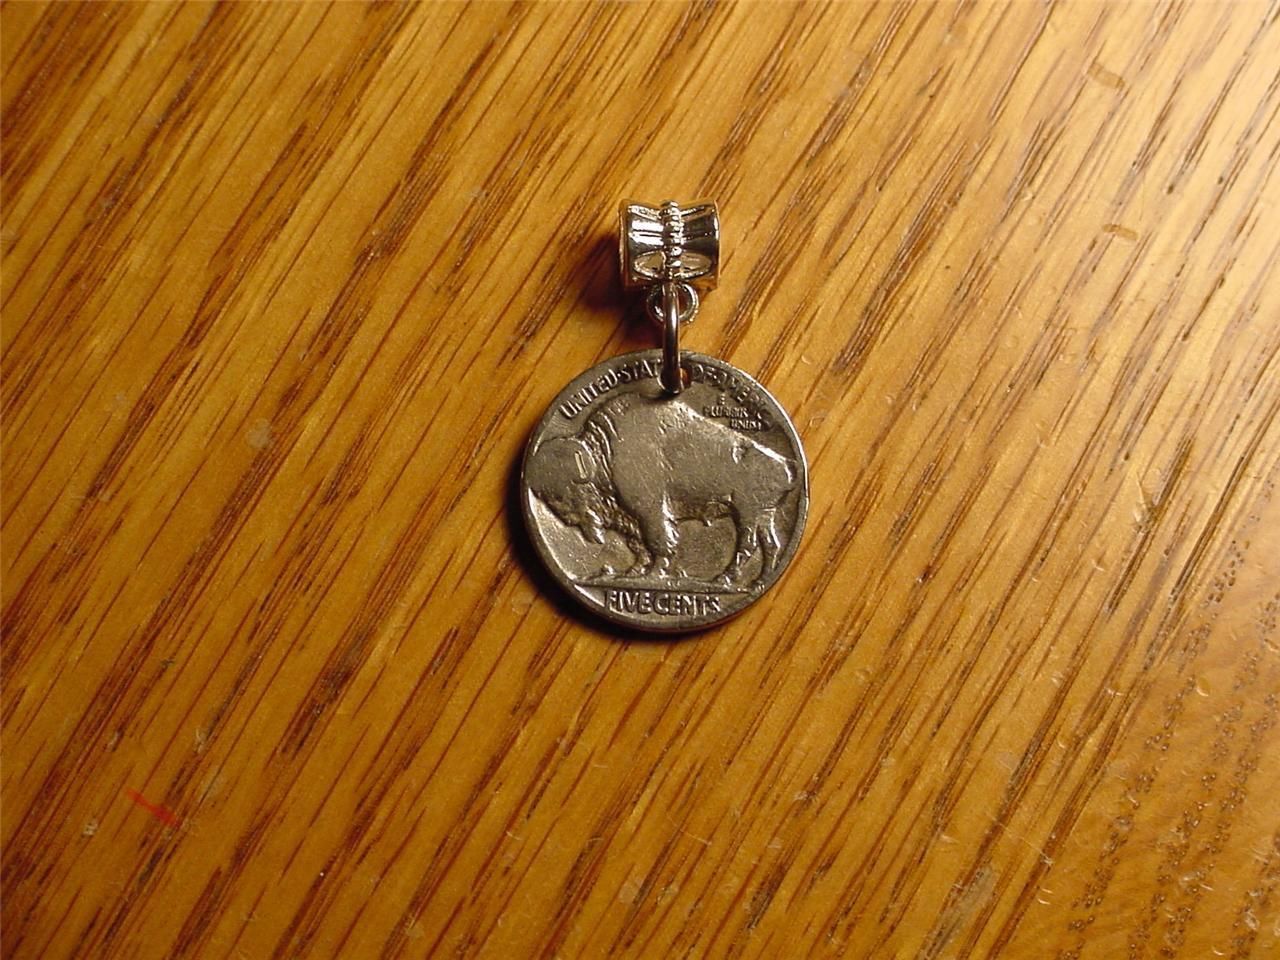 Primary image for OLD BUFFALO NICKEL PENDANT ANTIQUE NATIVE AMERICAN COIN JEWELRY NECKLACE CHARM